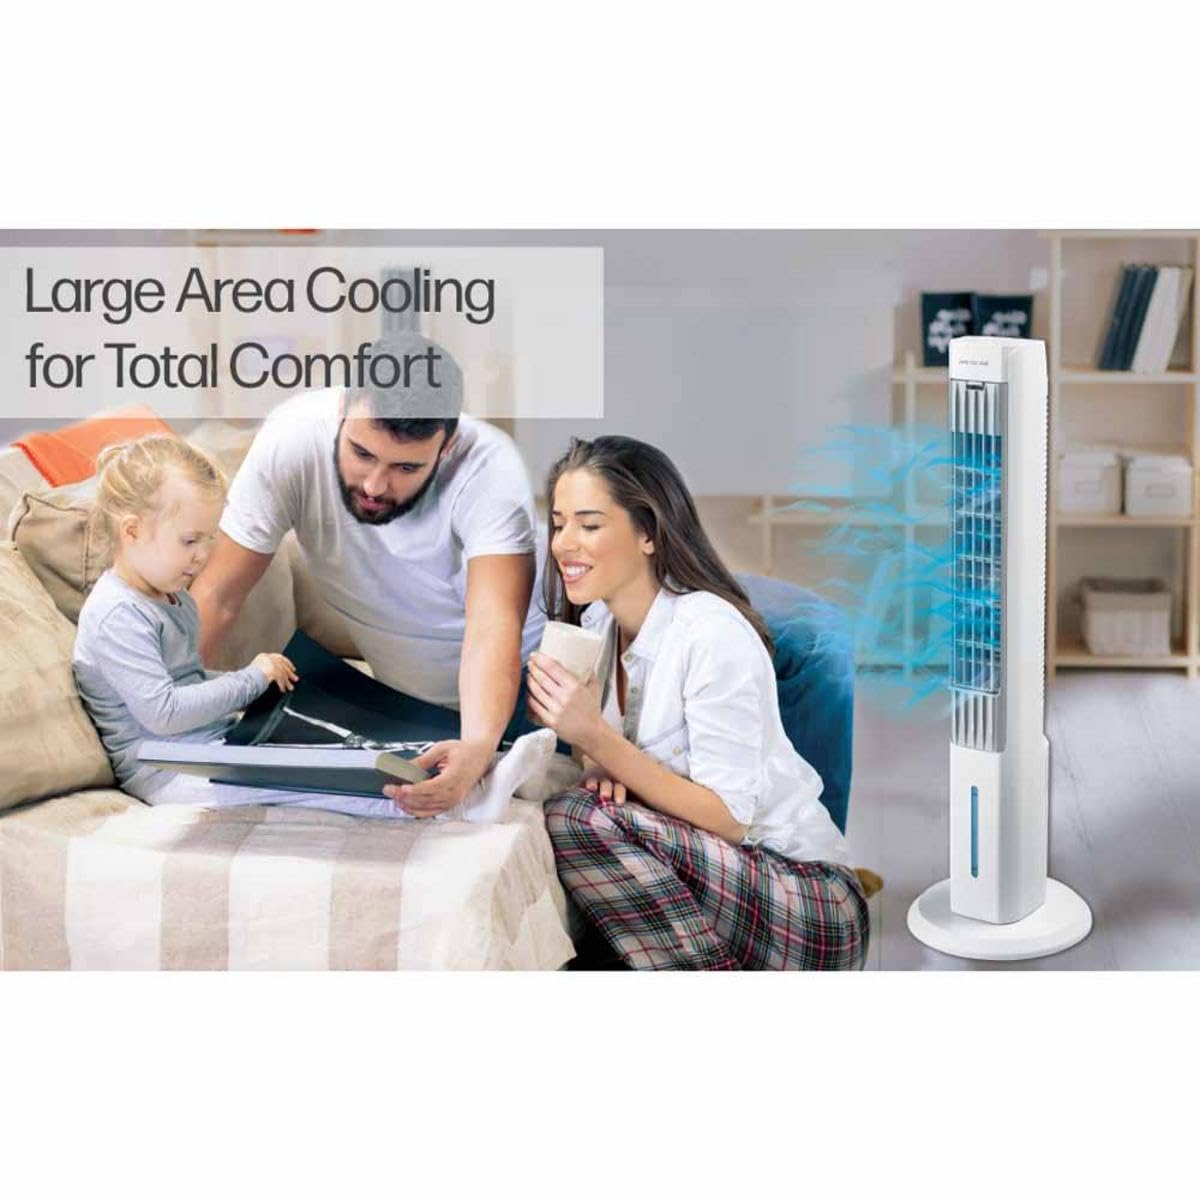 Arctic Air Tower+ Indoor Evaporative Cooler with Oscillating and Quiet Fan Function, Auto-Off Timer, 4 Fan Speeds, LED Night Light, 16-Hour Cooling, Fan for Bedroom, Living Room, Office & More,White